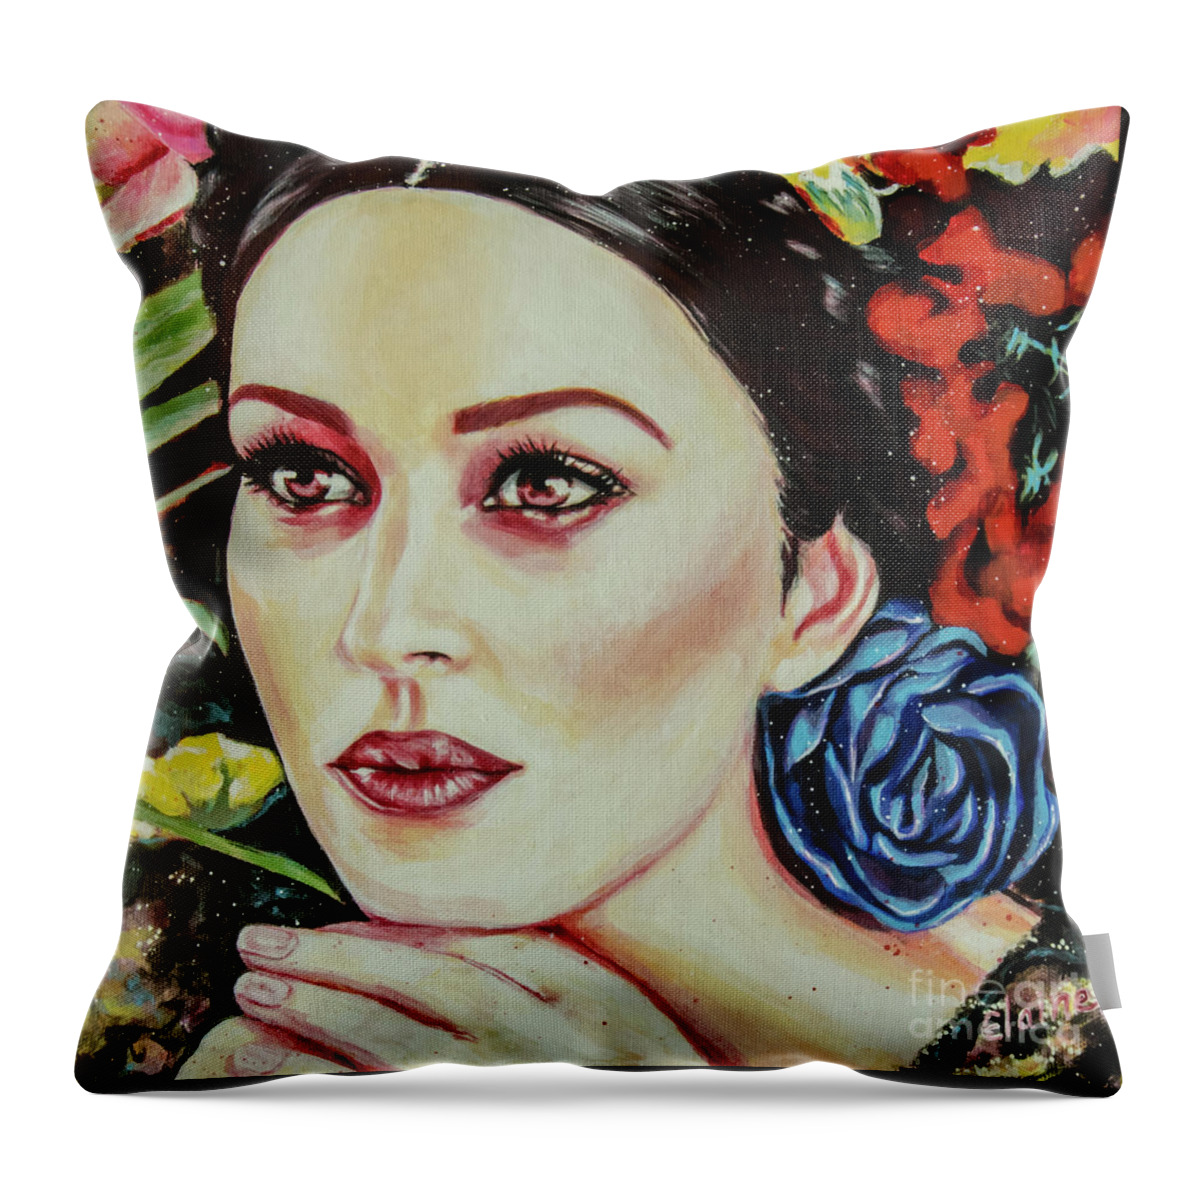 Monica Bellucci Throw Pillow featuring the painting Monica Bellucci by Elaine Berger